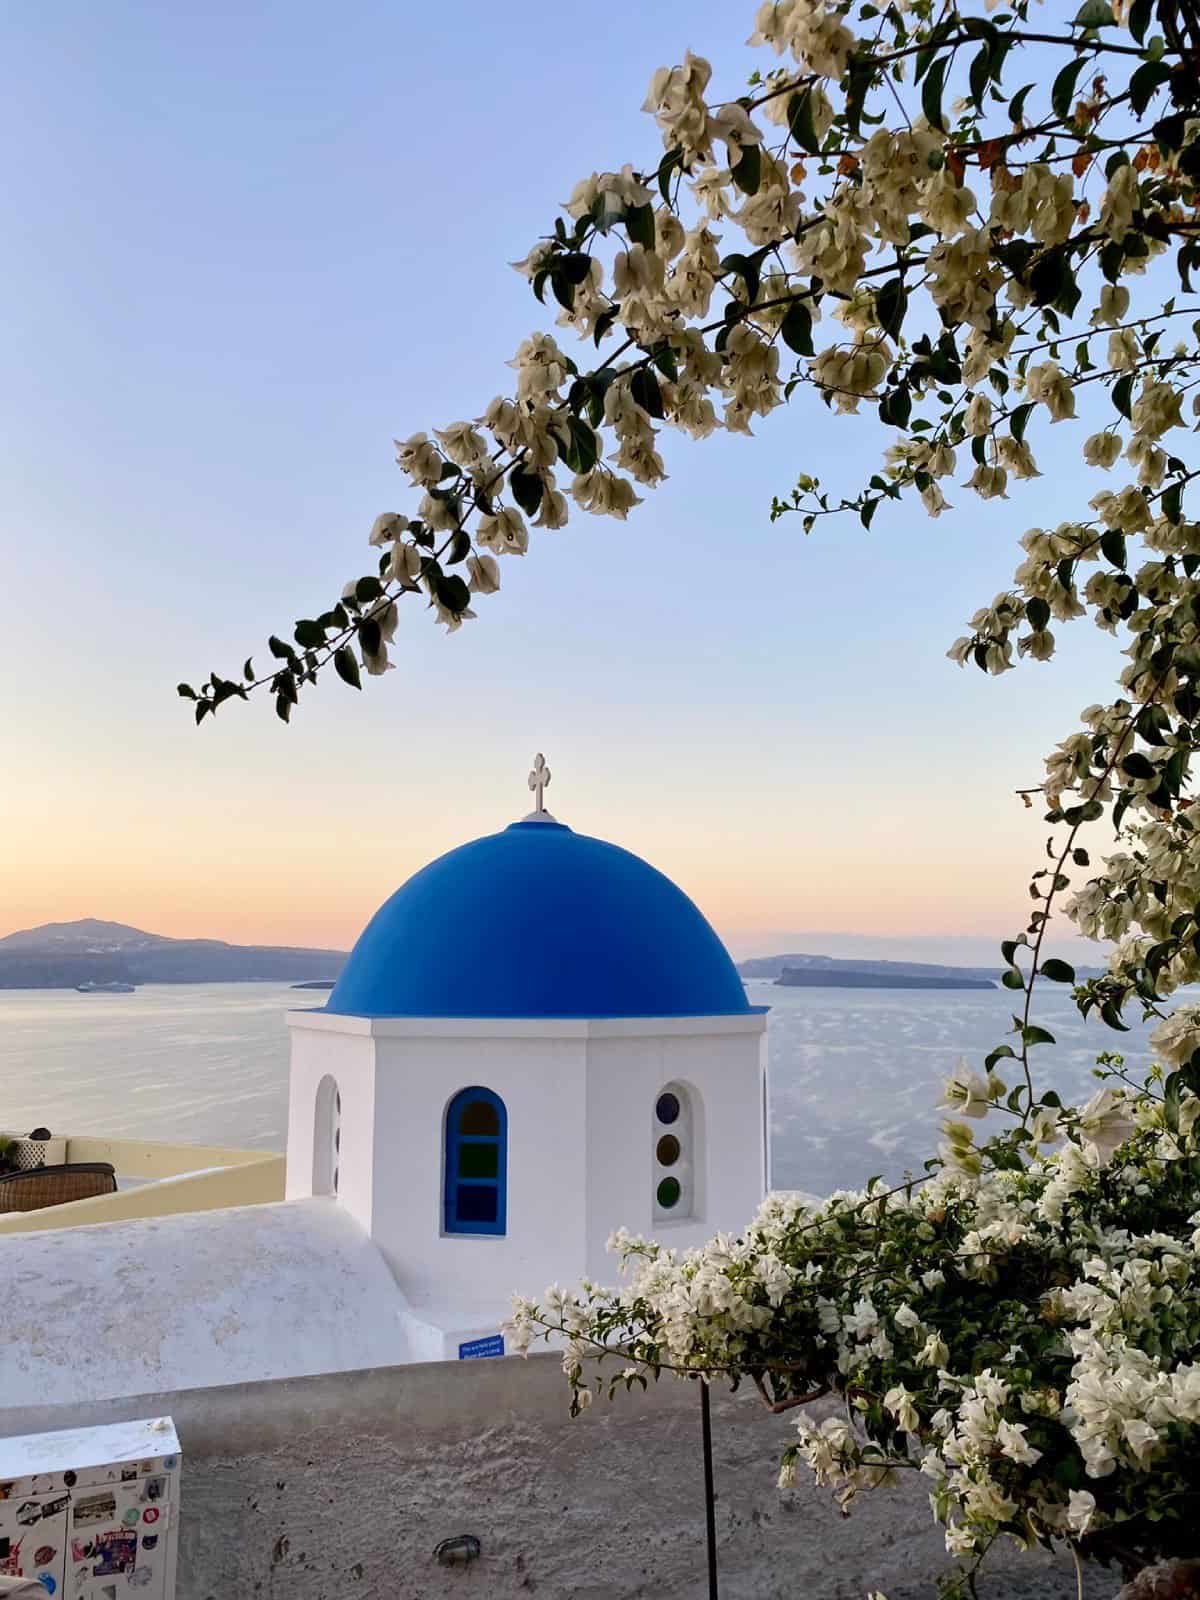 Sunrise is a great time to enjoy Oia without as many crowds - things to do in Oia, & is Oia worth visiting?Things to do in Oia, Santorini (& is Oia worth visiting?) - Agios Nikolaos